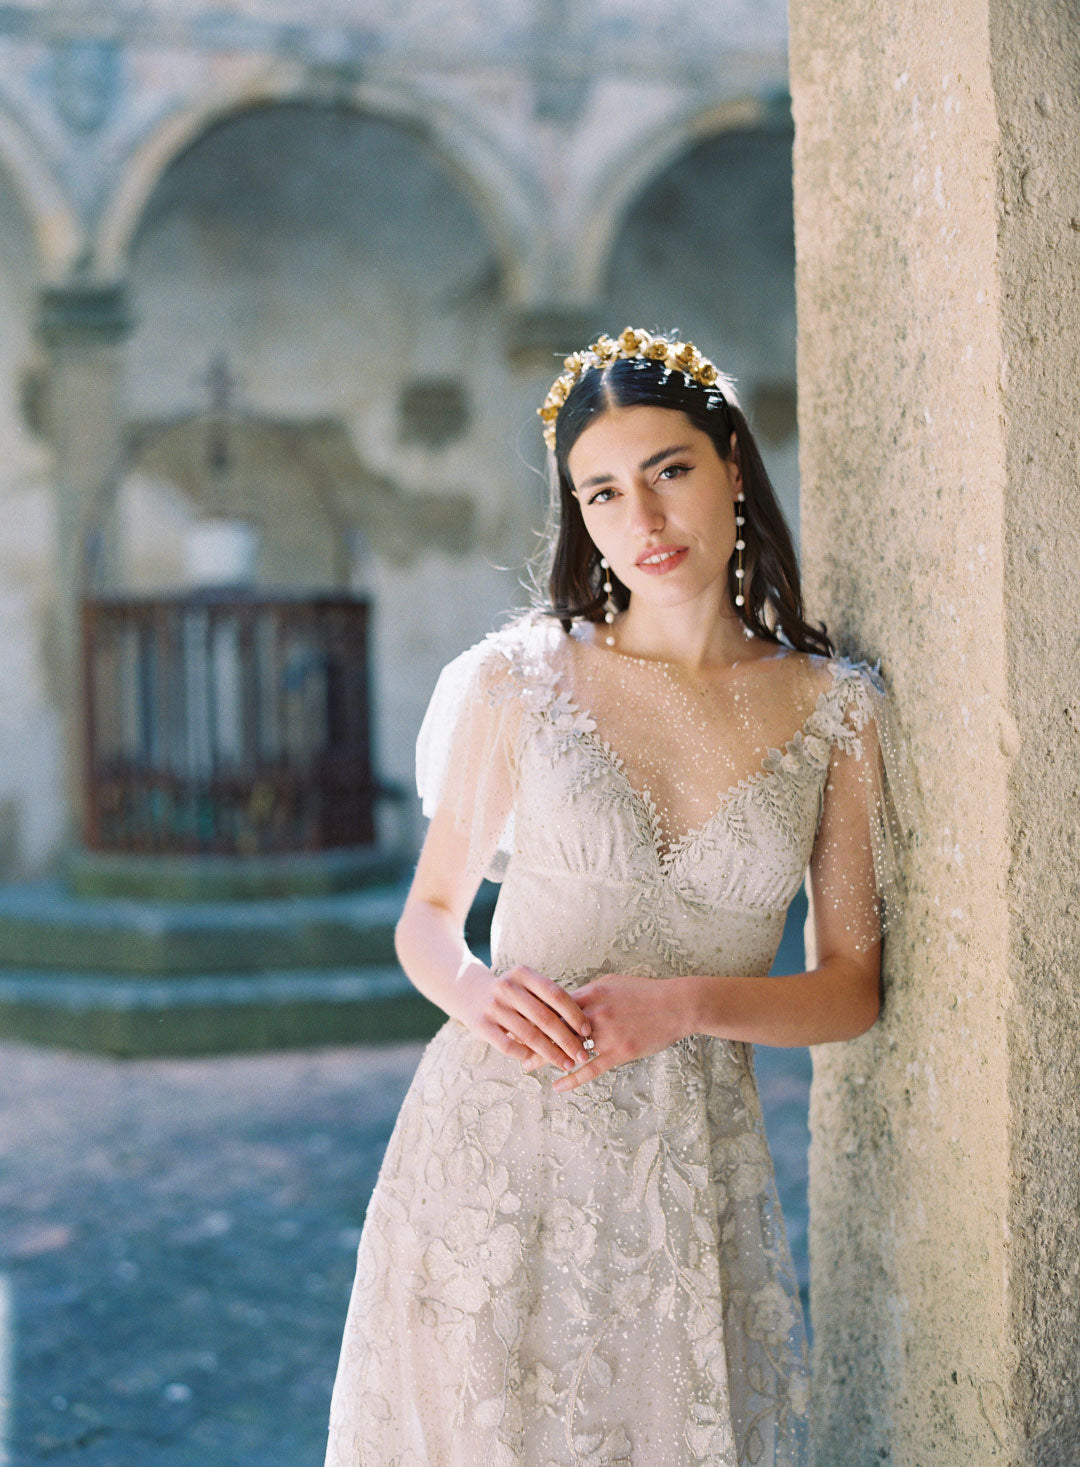 Something similar to claire pettibone soleil wedding gown? : r